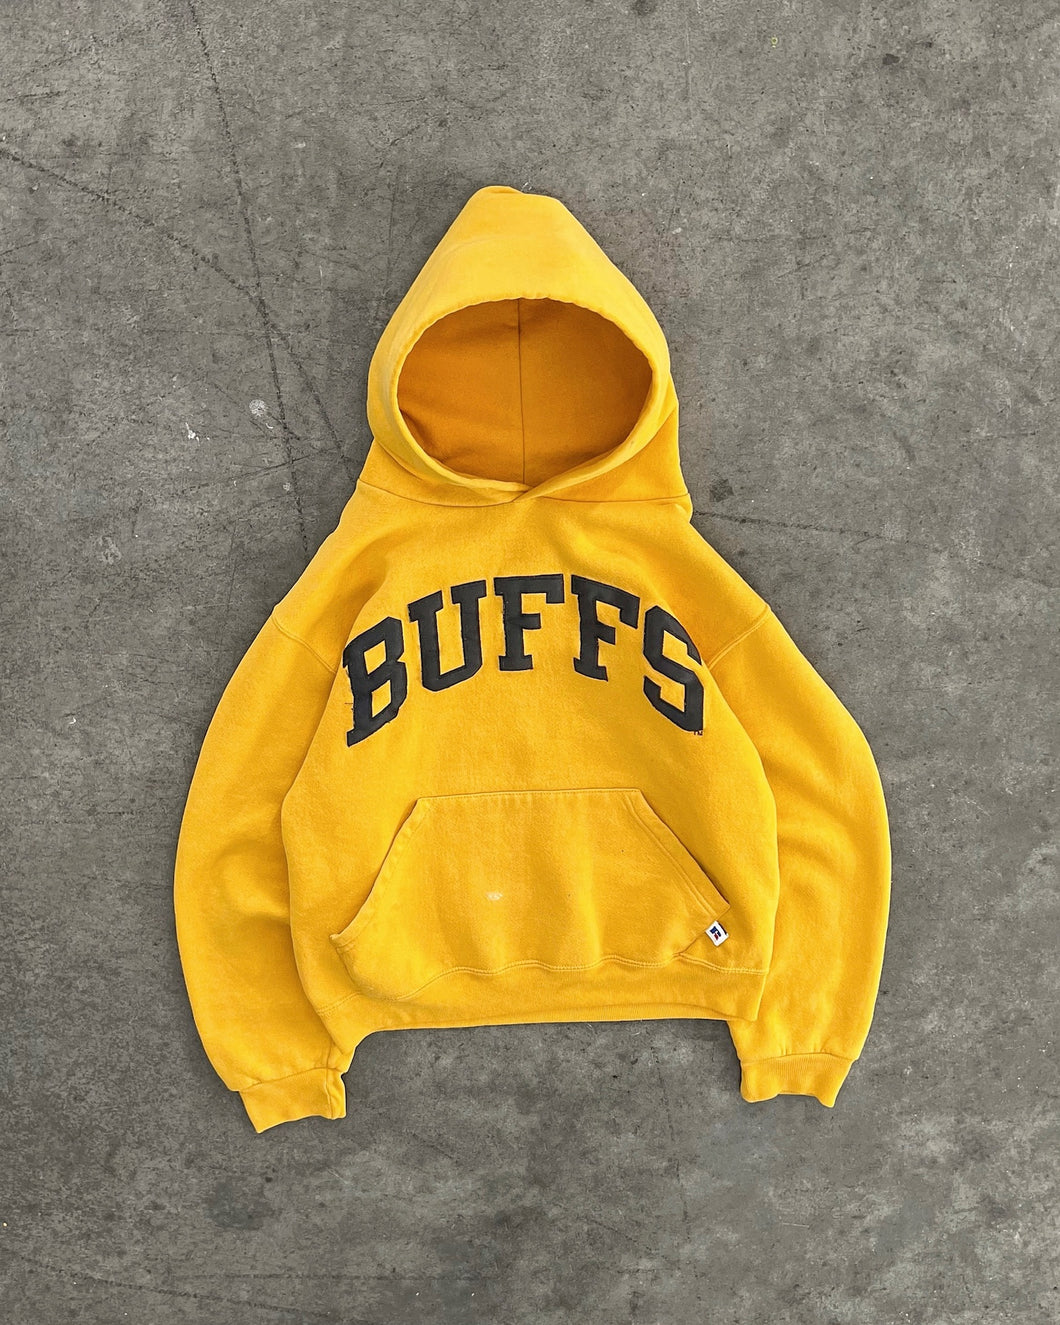 FADED YELLOW “BUFFS” RUSSELL HOODIE - 1990S